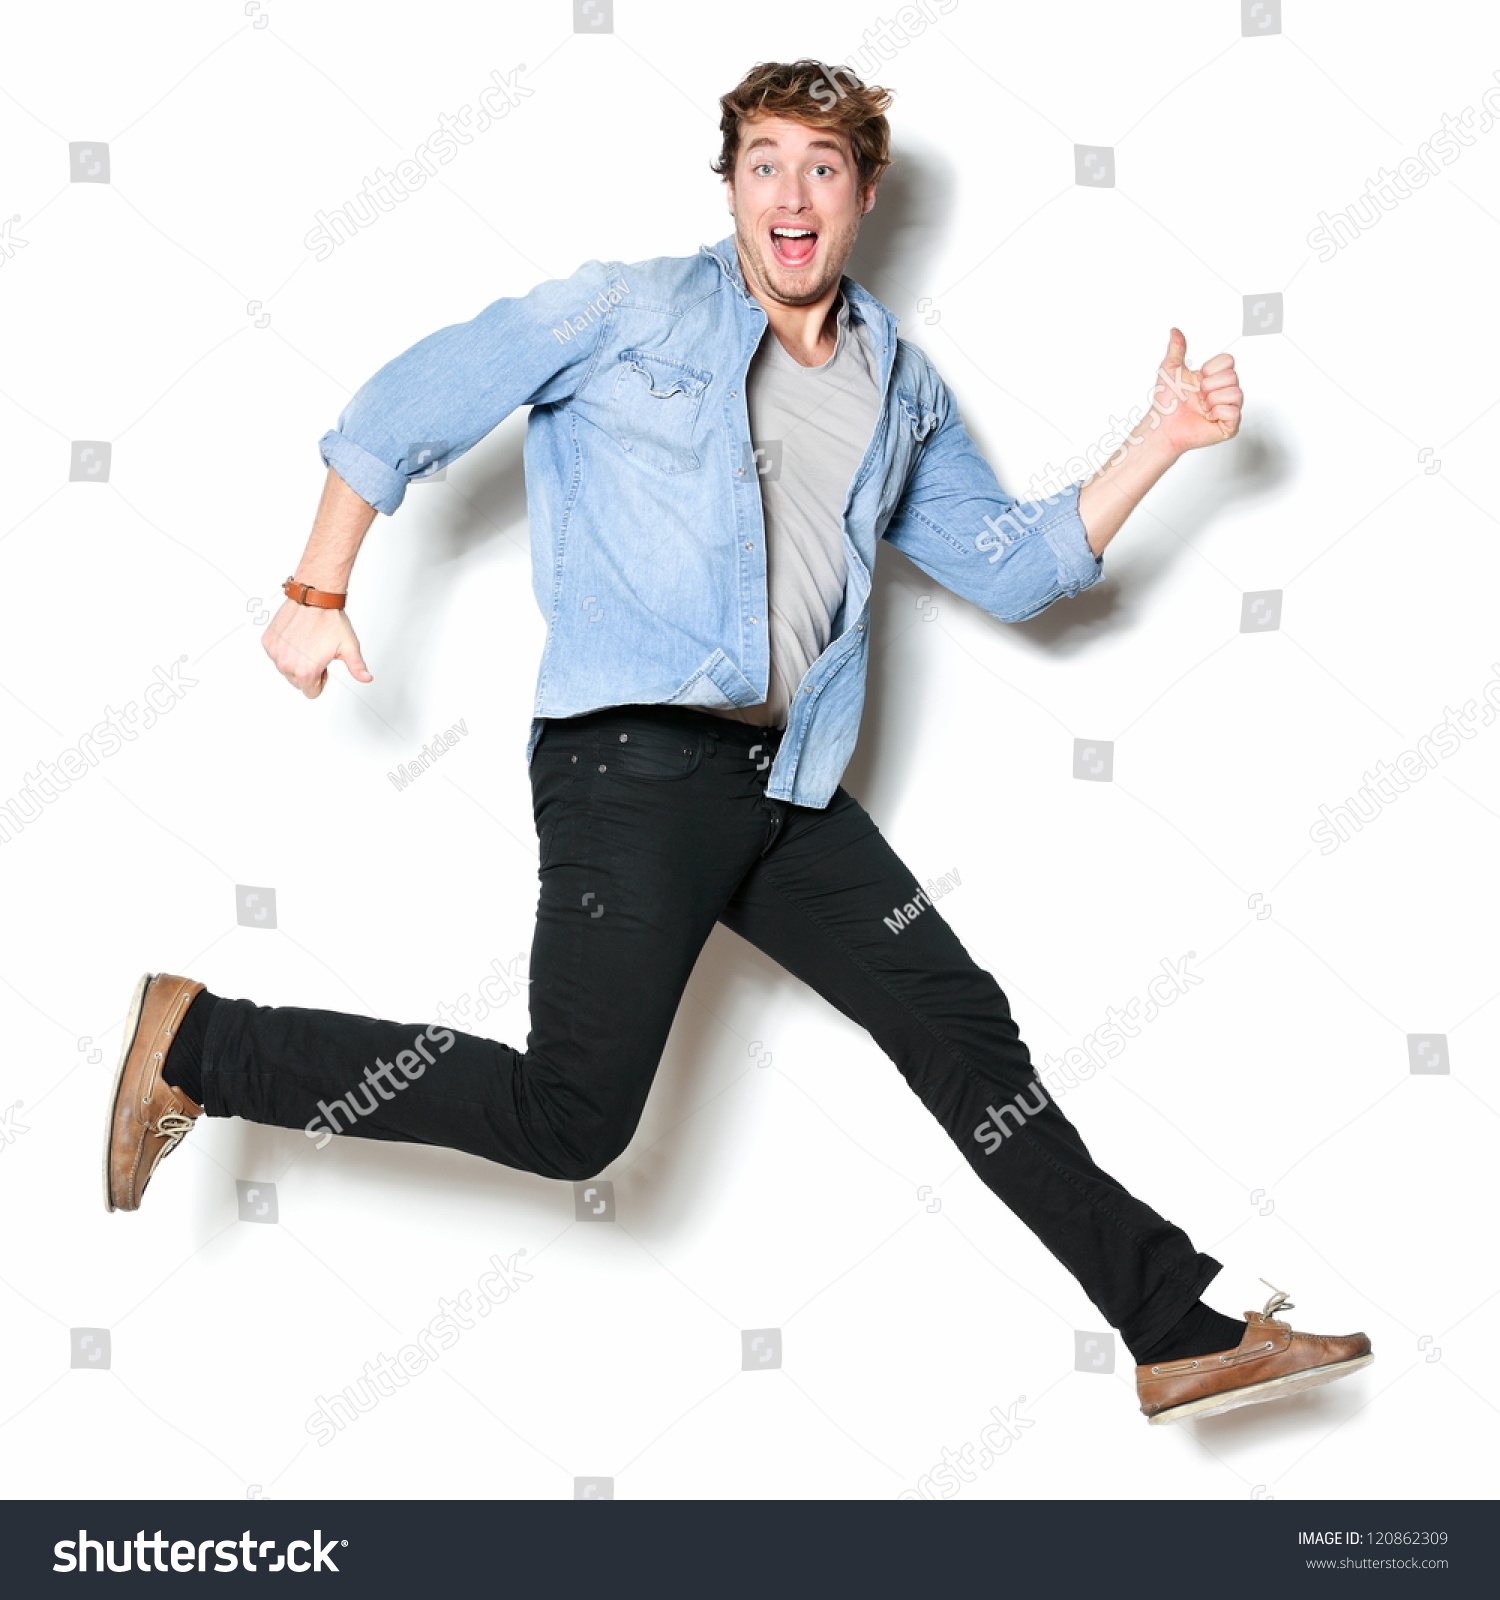 Jumping Man Happy Excited Funny Portrait Stock Photo & Image ...